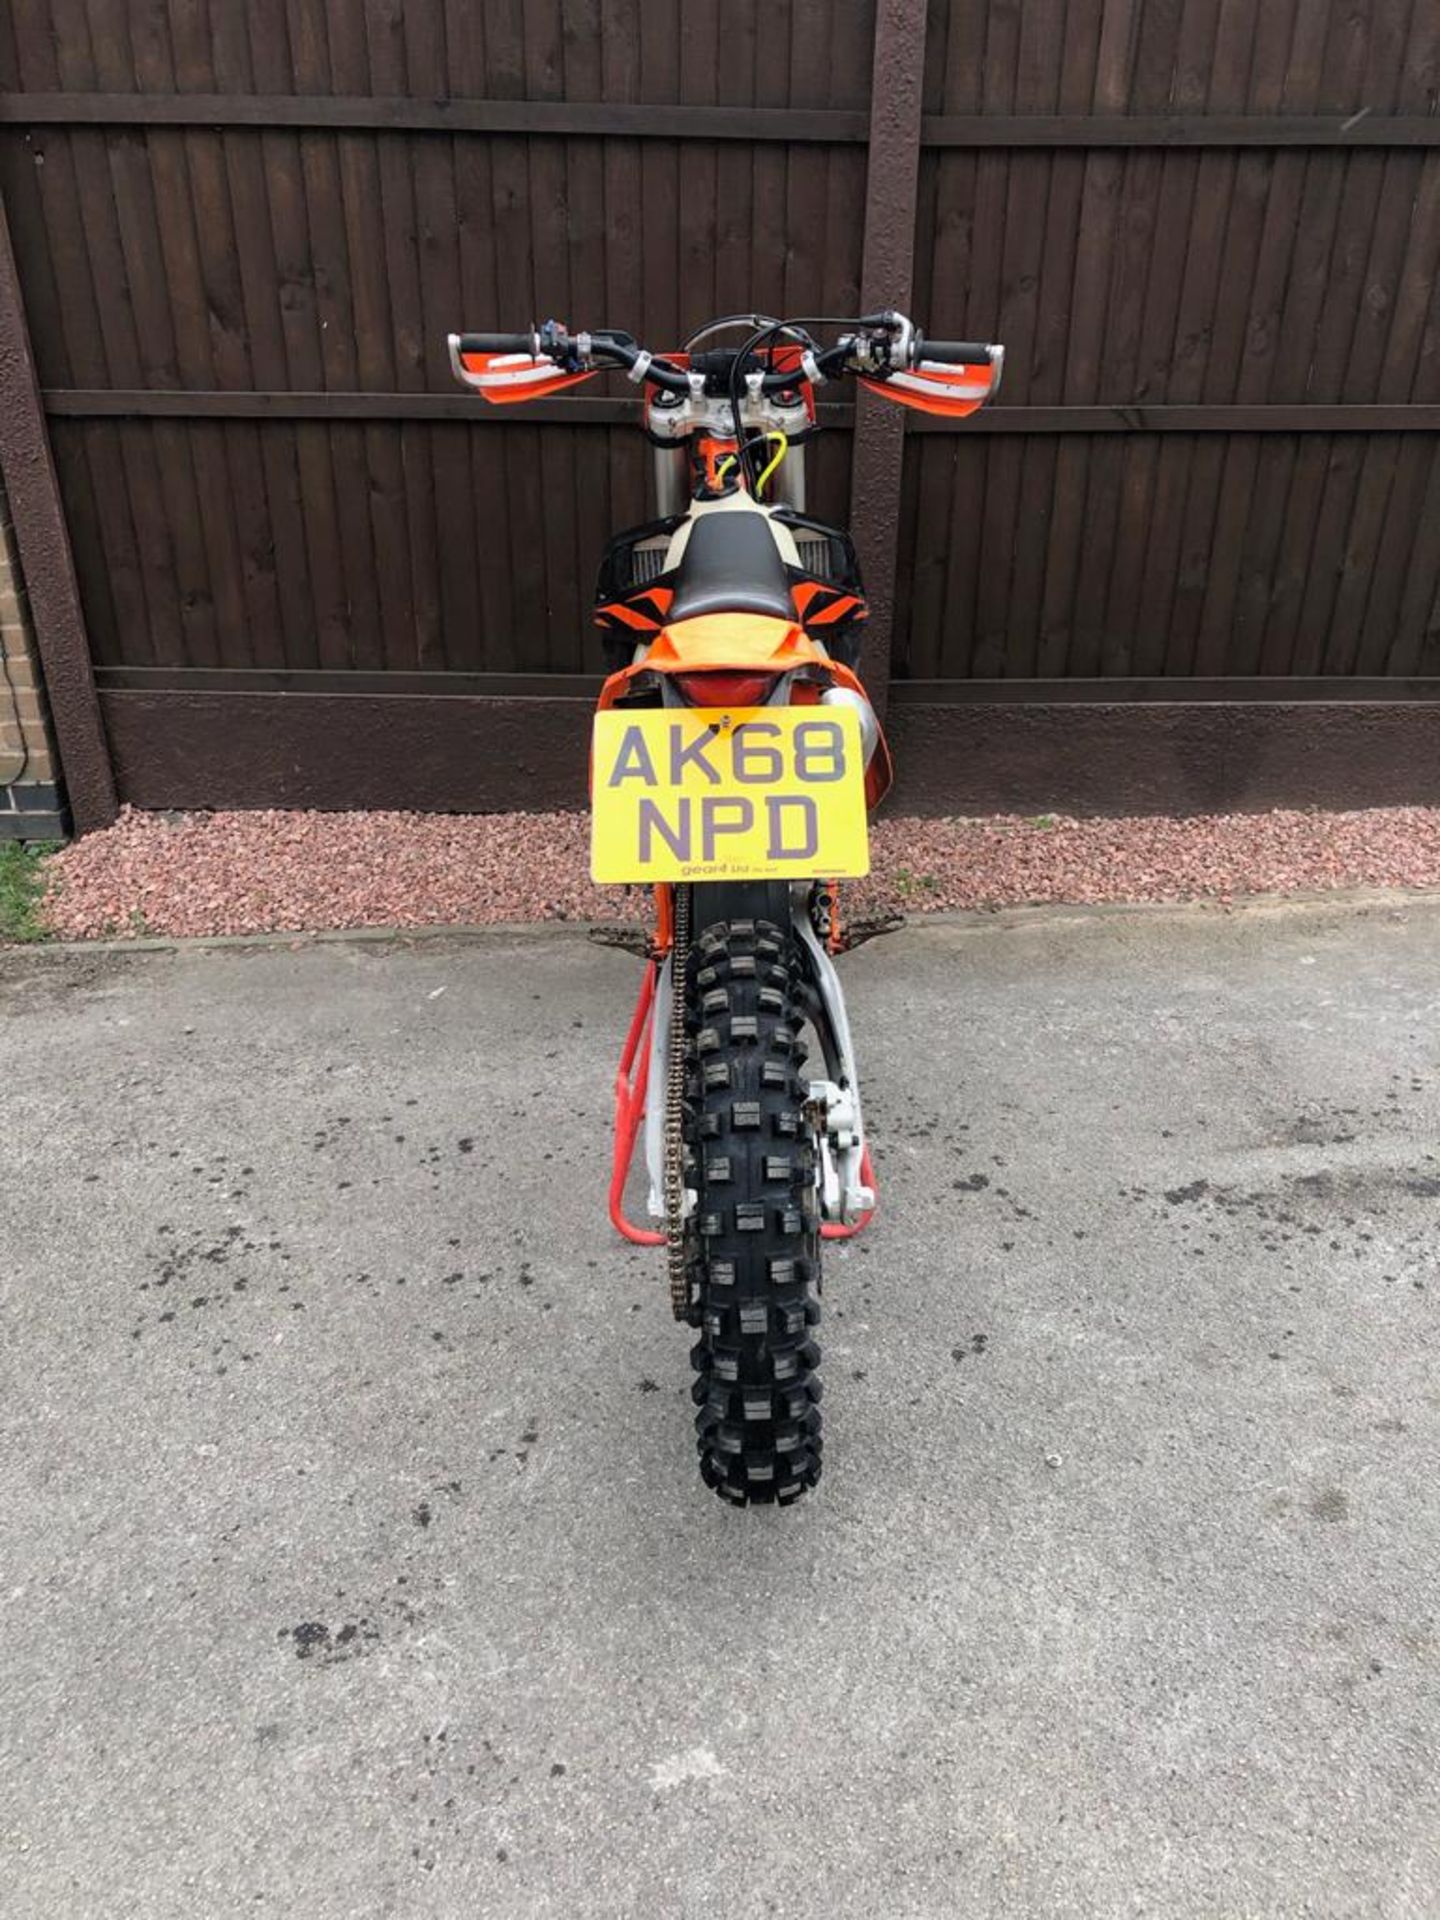 2019 KTM 300 EXC TPI 19, 293CC, LOW HOURS, 1 OWNER FROM NEW *NO VAT* - Image 4 of 6